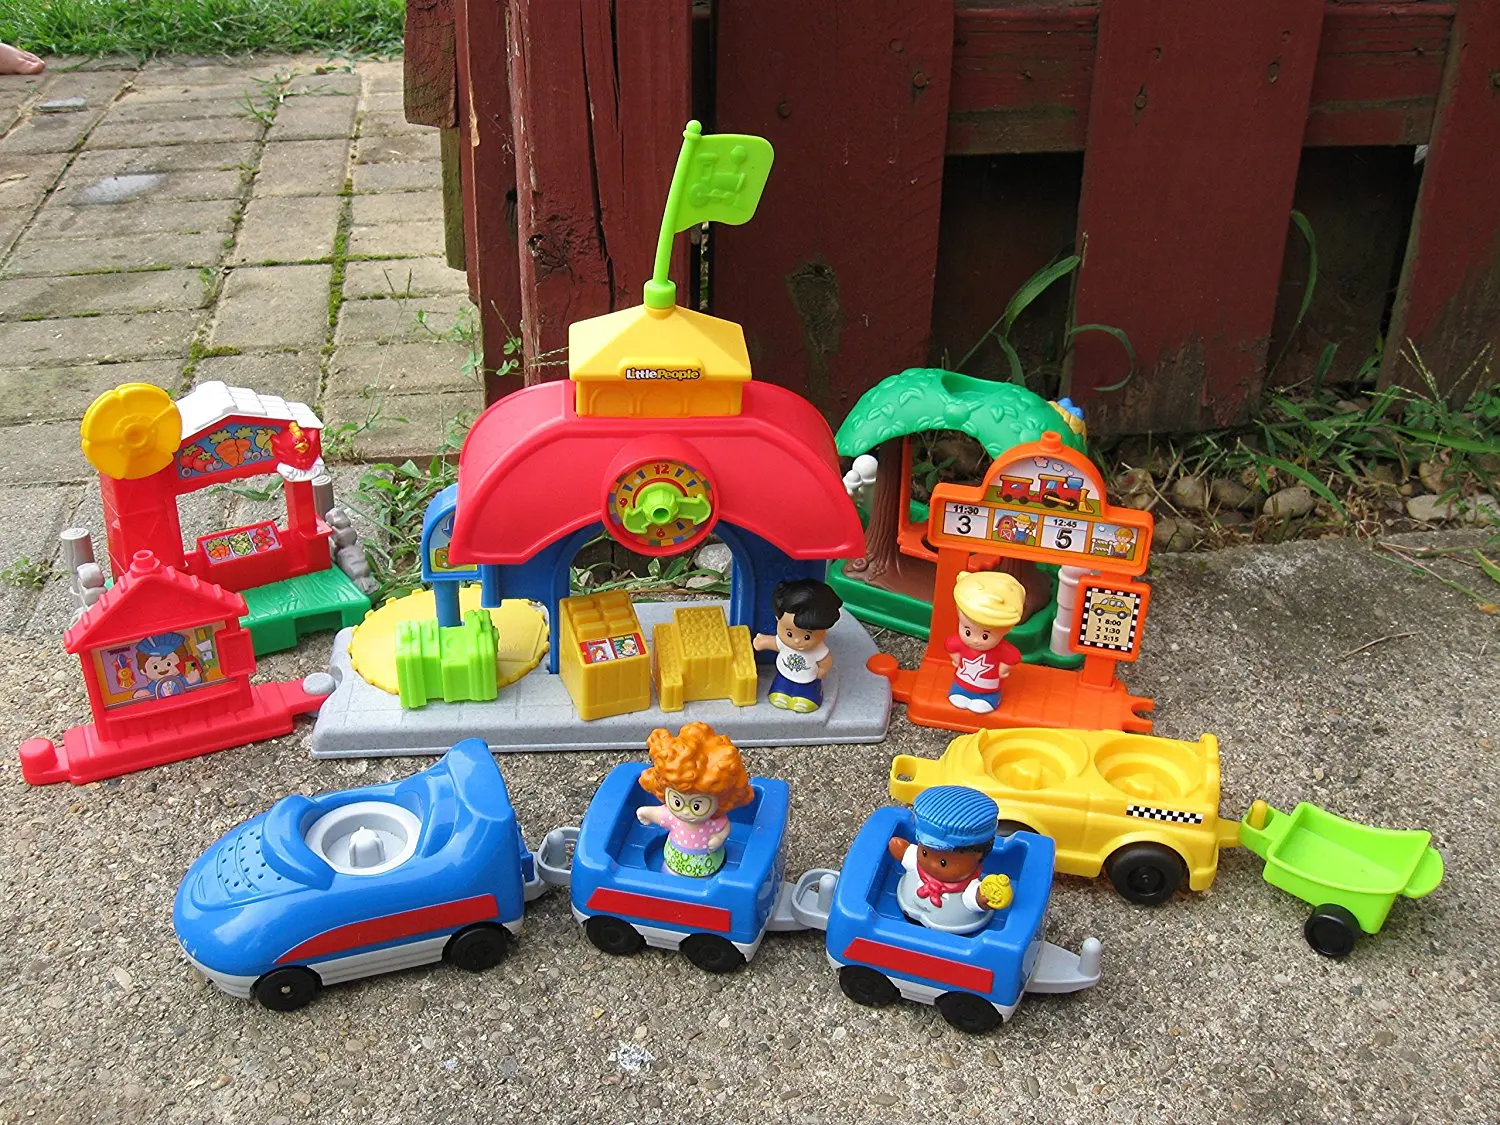 fisher price load and go train